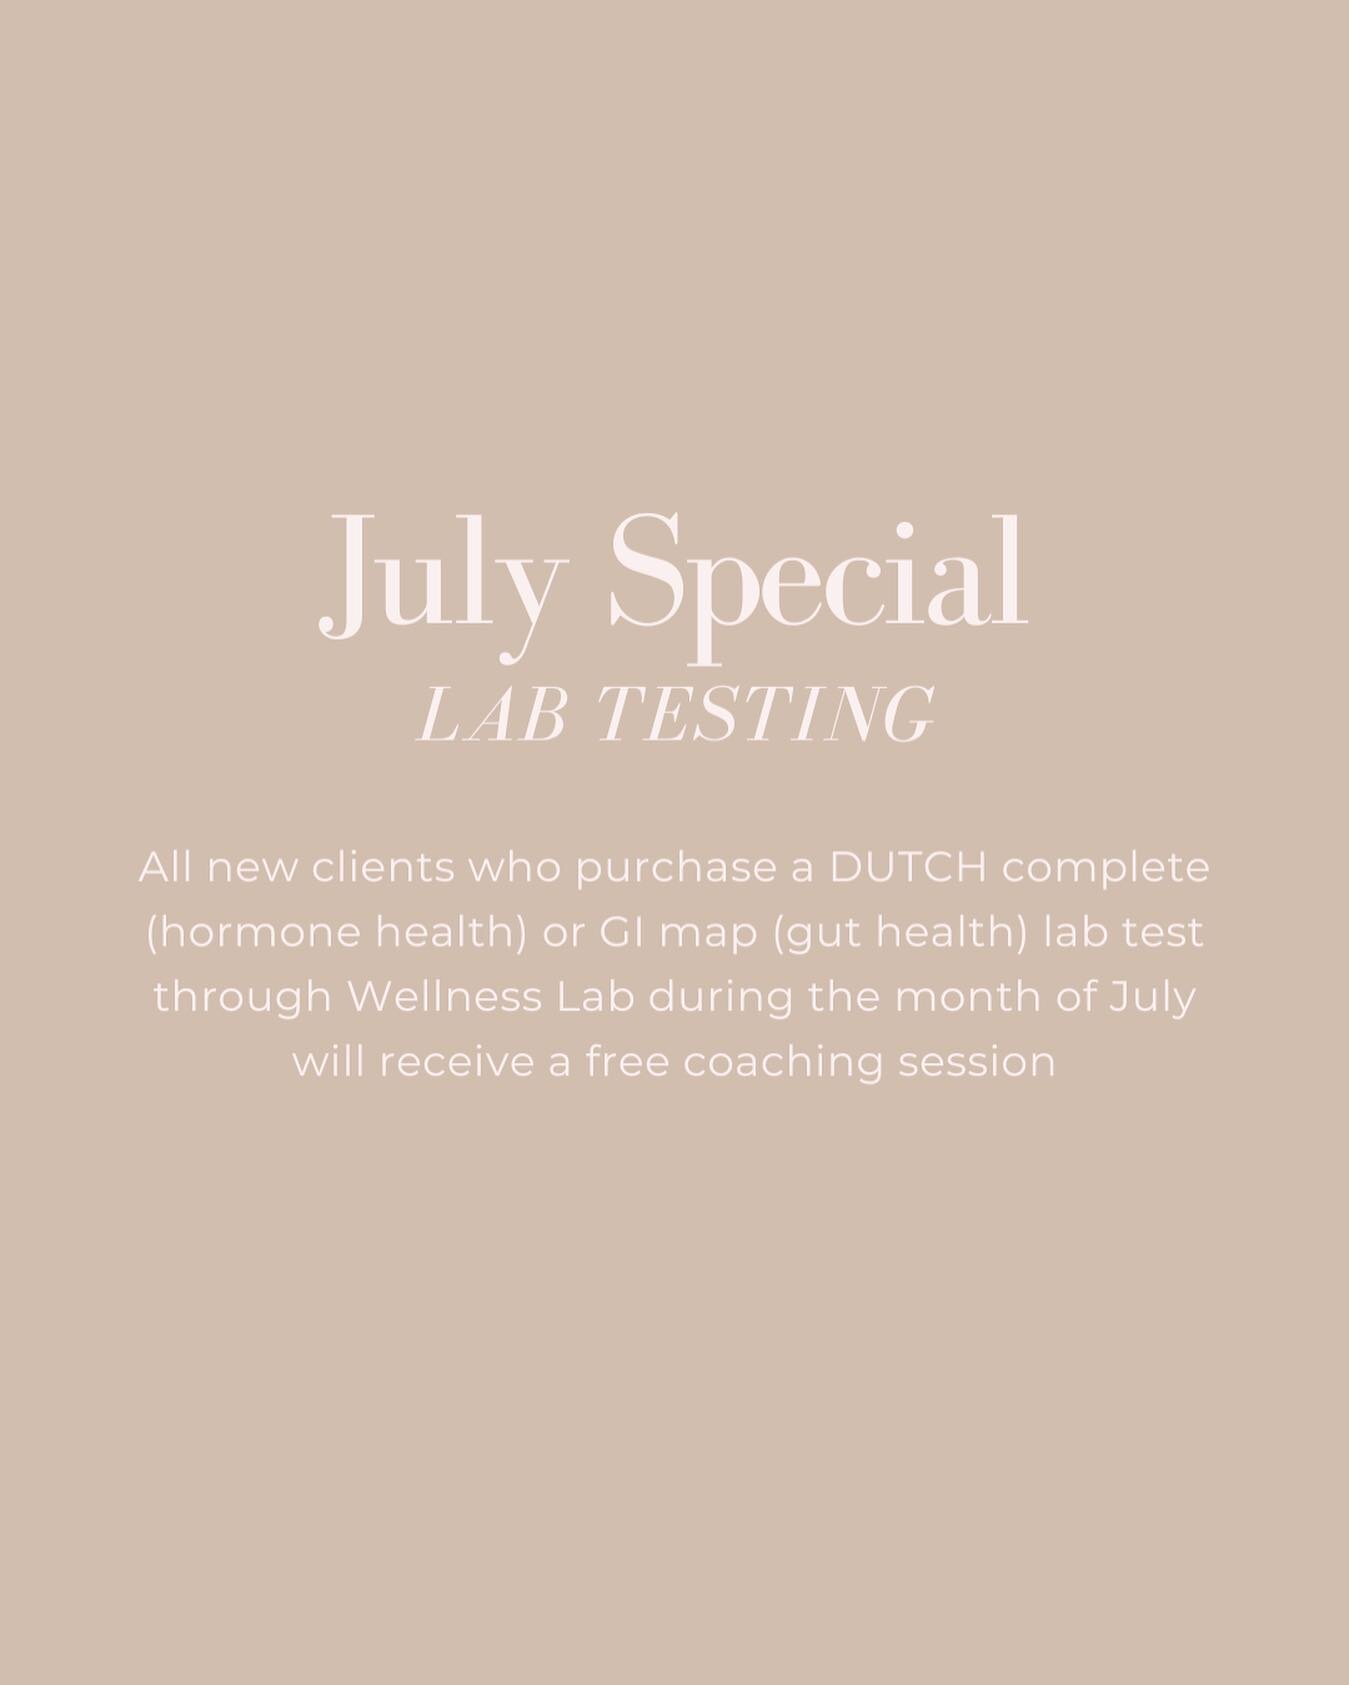 There&rsquo;s still 1 week left to take advantage of the July special! 

If you&rsquo;ve been experiencing:
&bull; painful periods
&bull; brain fog / trouble concentrating
&bull; mood swings, anxiety, depression
&bull; bloating / sensitive to a # of 